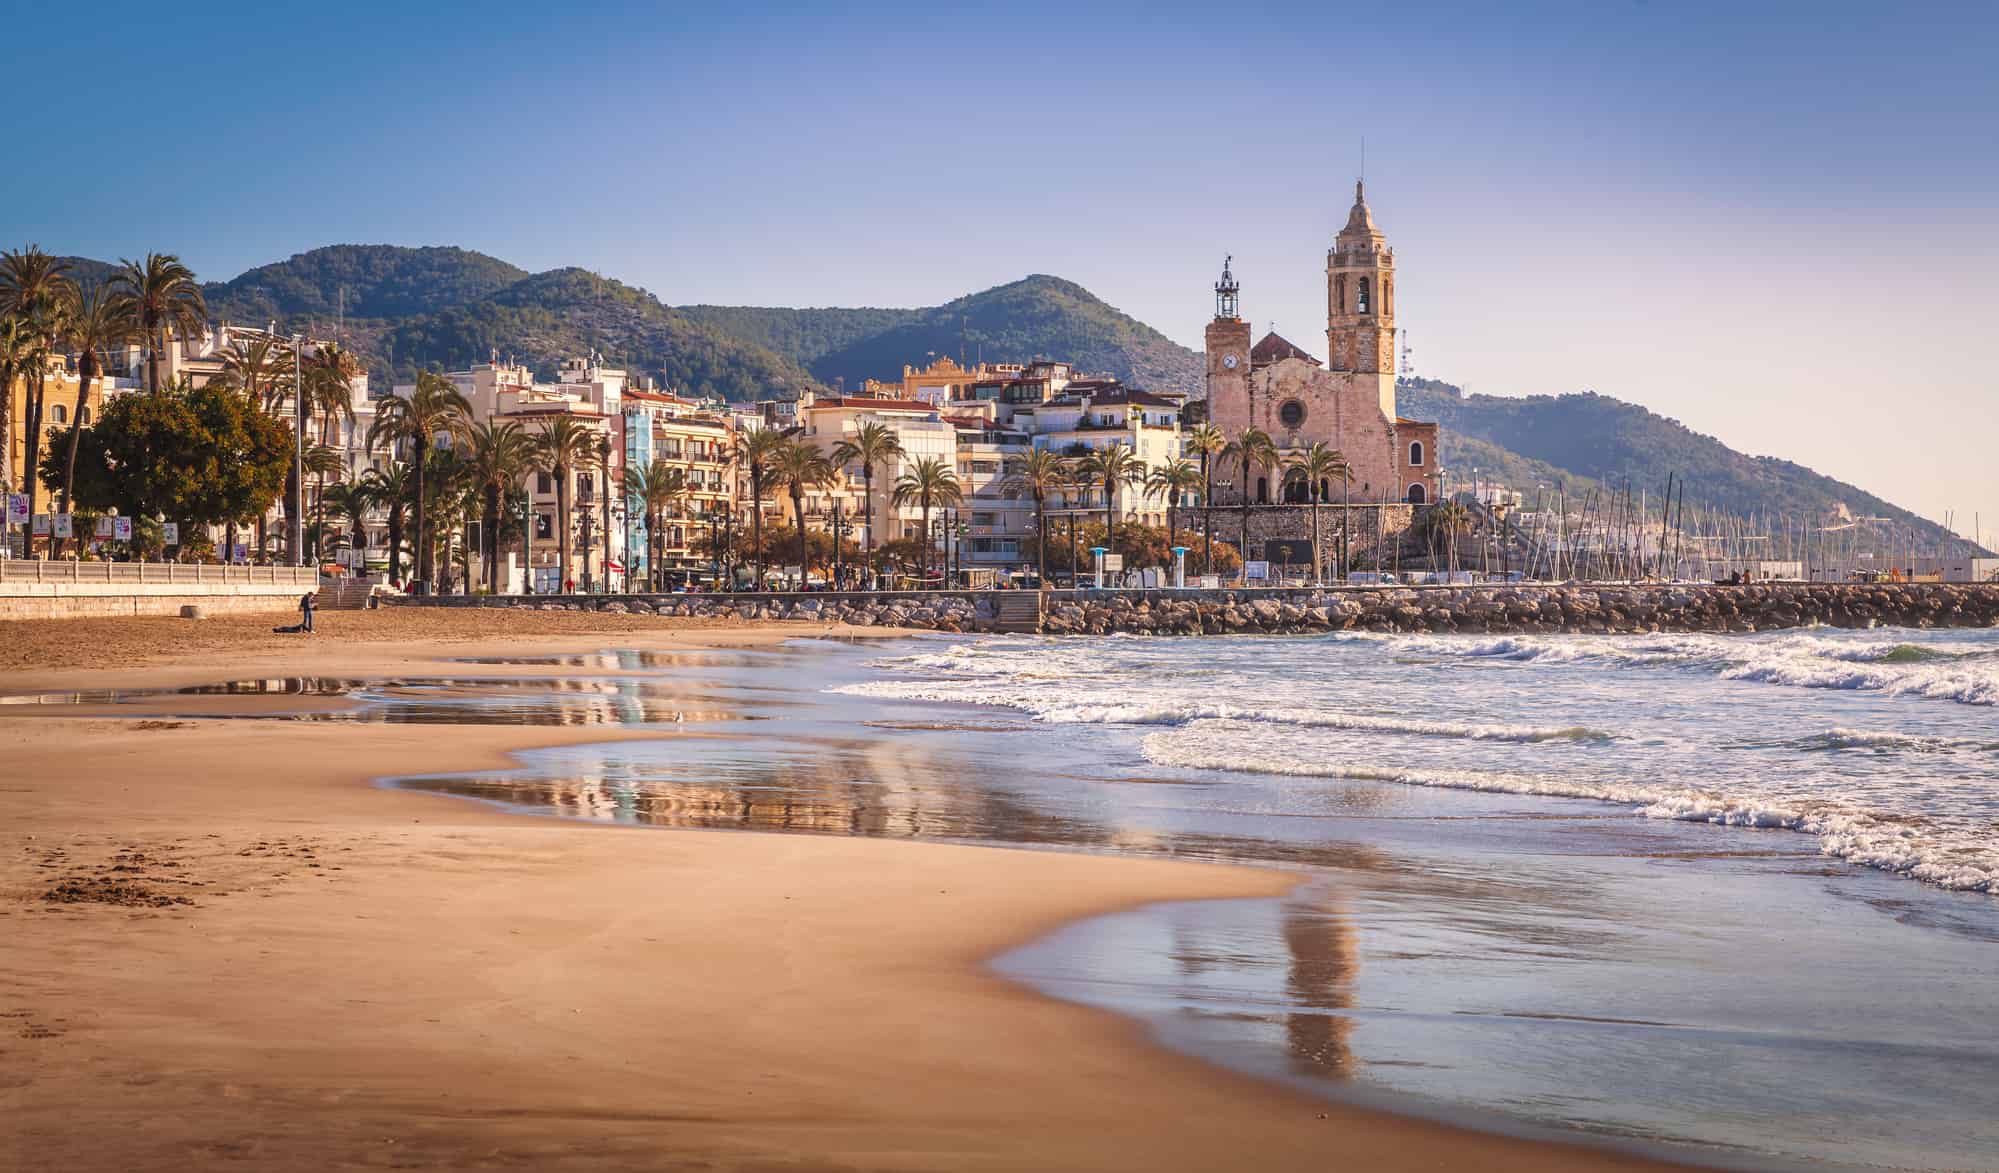 Sitges is a town near Barcelona in Catalunya, Spain. It is famous for its beaches and nightlife